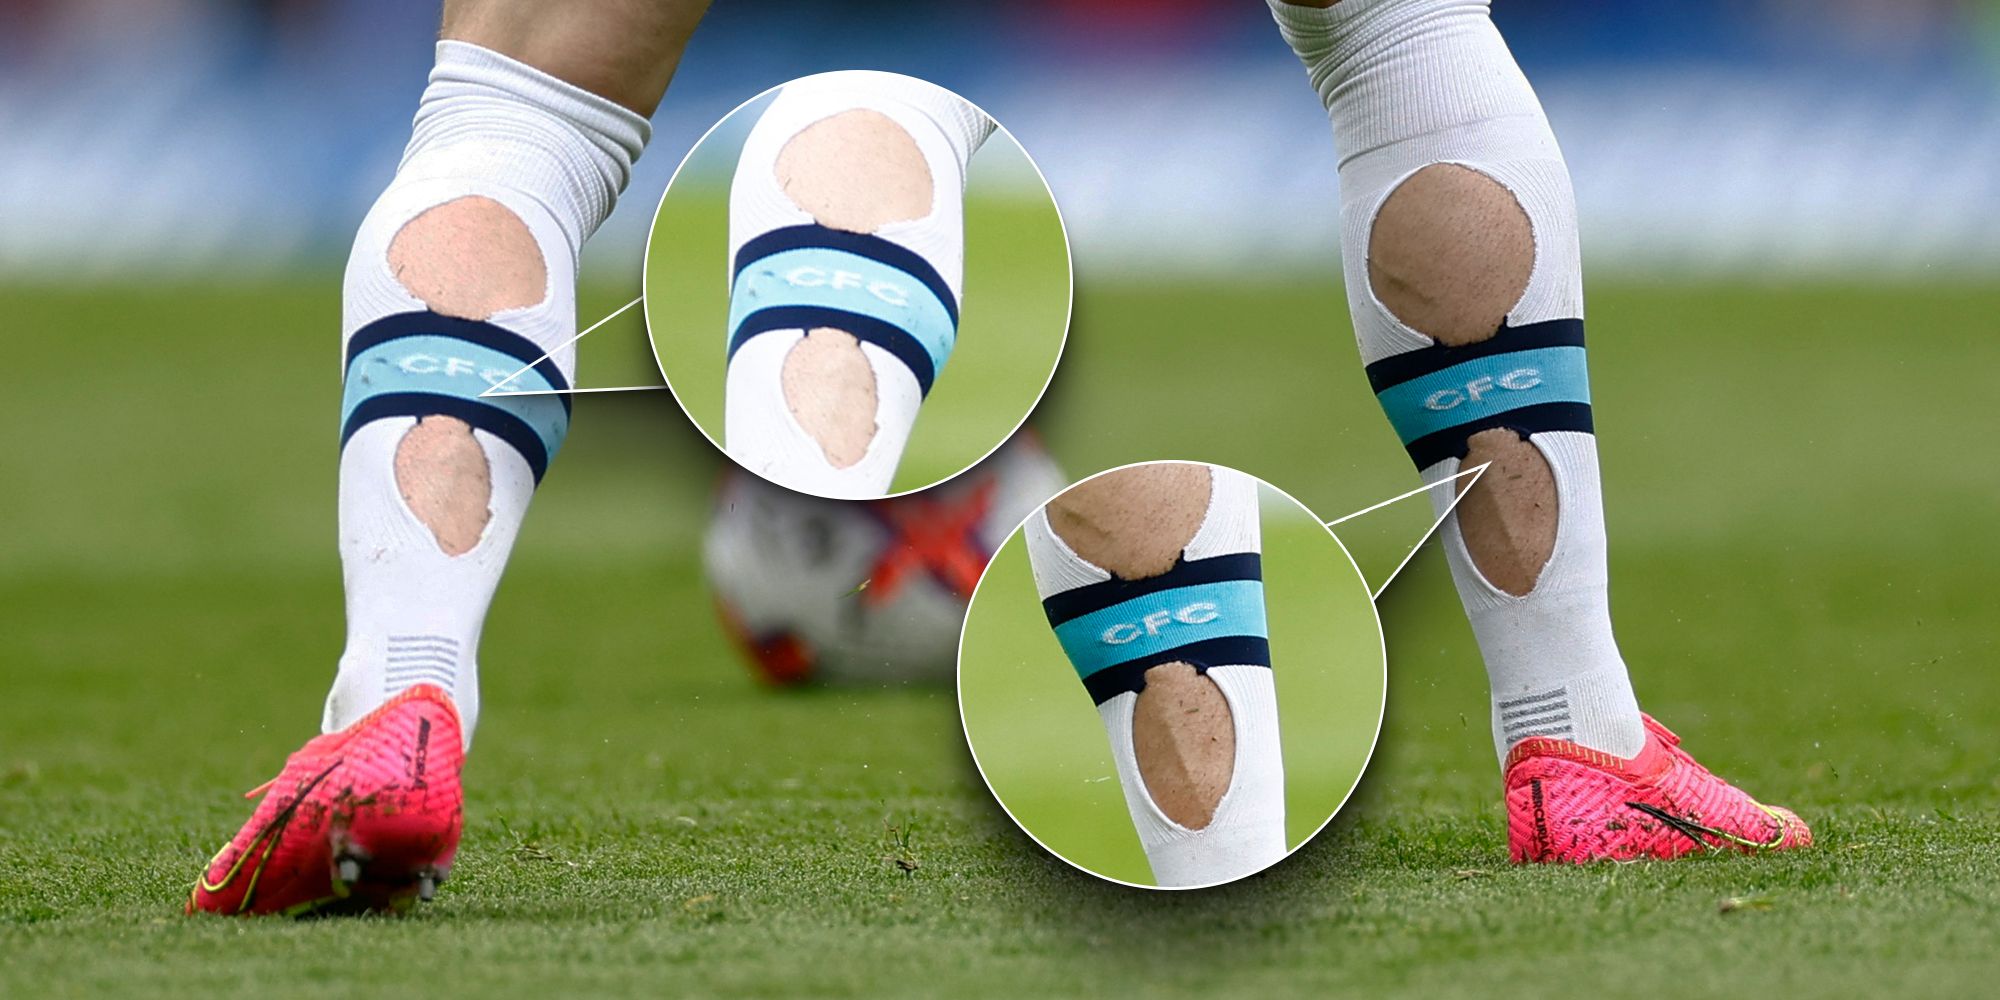 Why do so many footballers wear these socks?